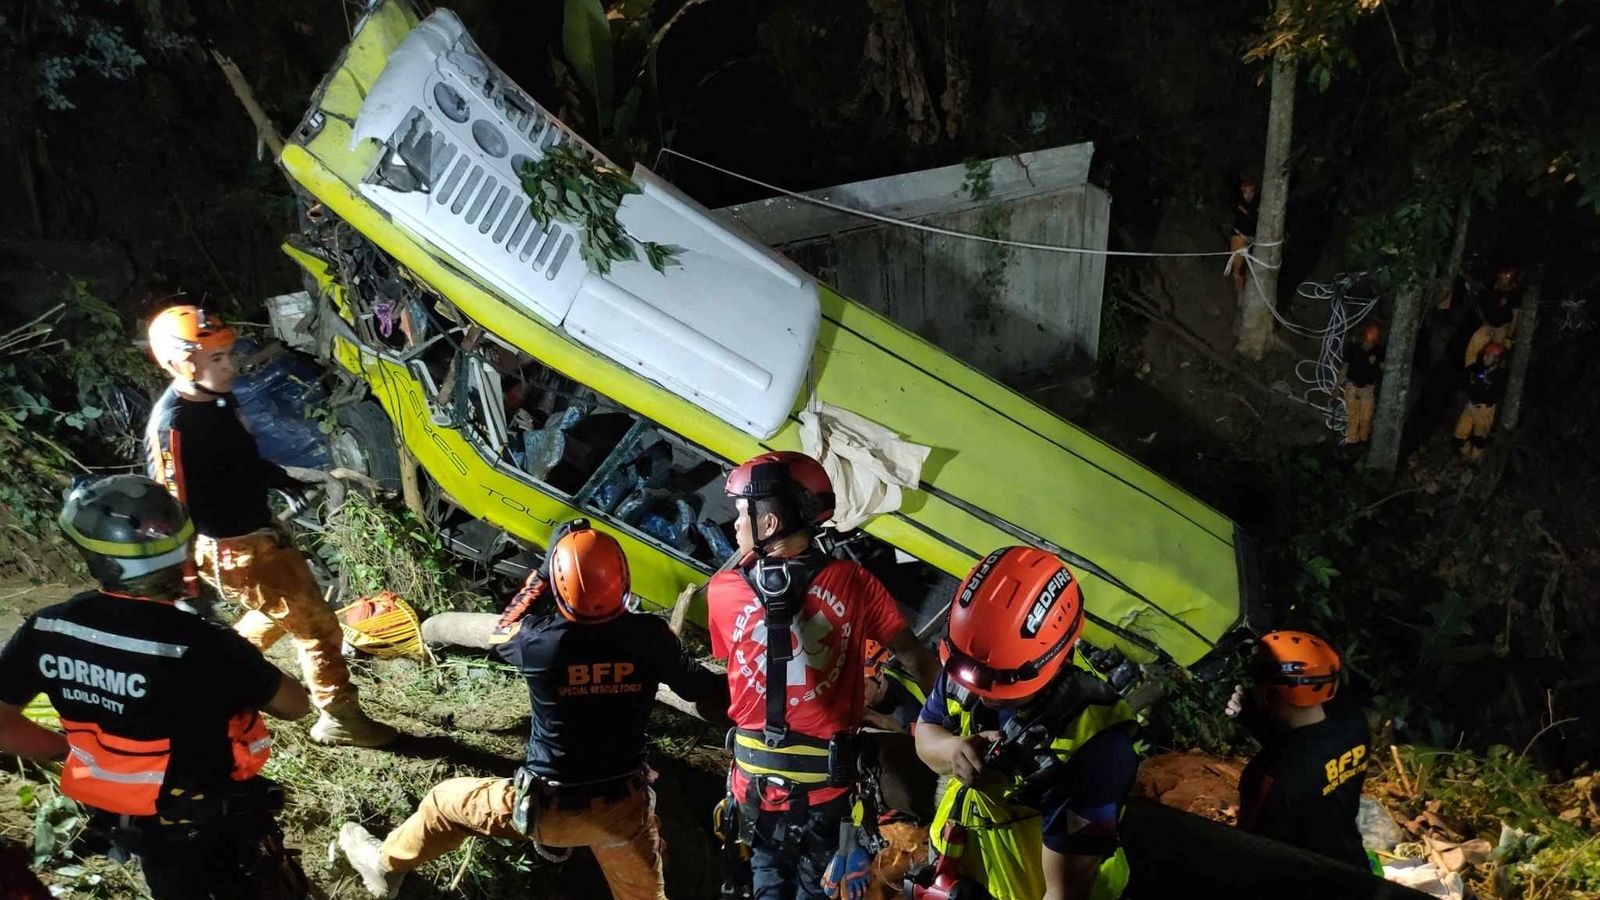 Bus plunges into a ravine killing 16 in the Philippines